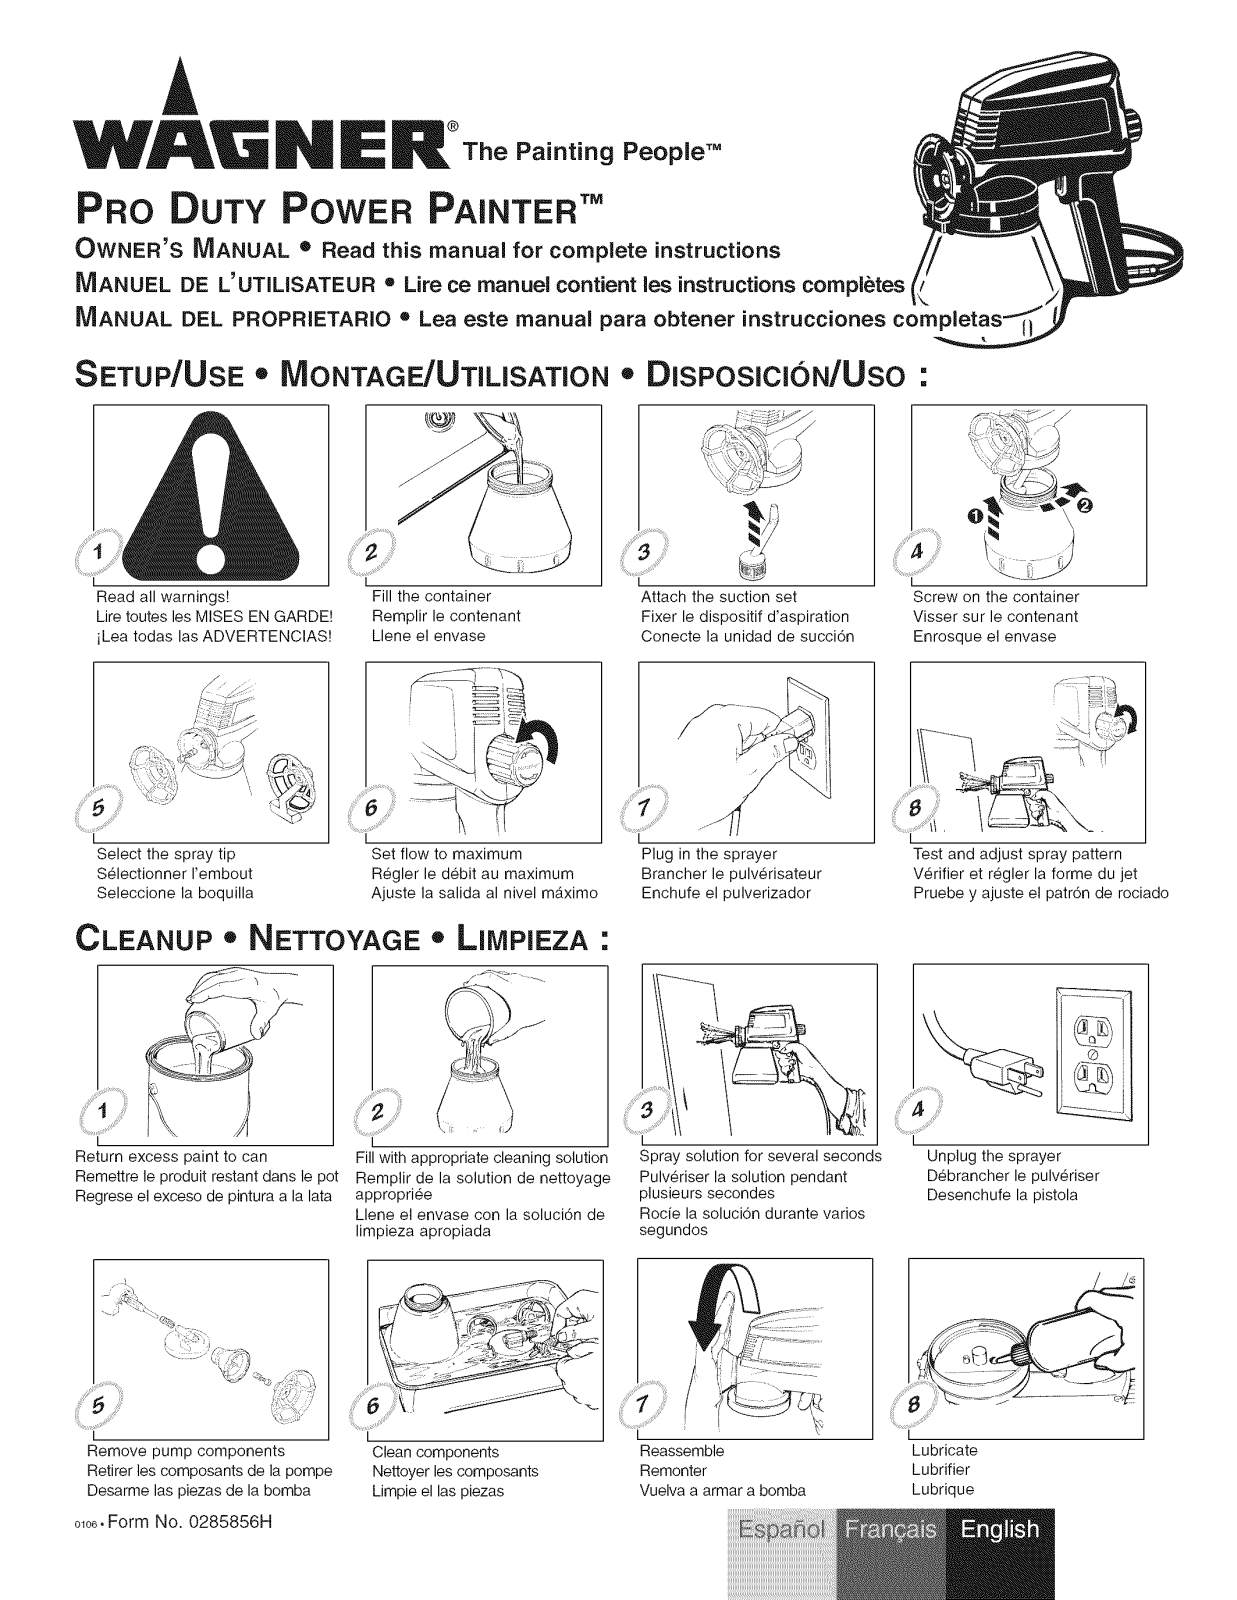 WAGNER PRO DUTY POWER PAINTER Owner's Manual